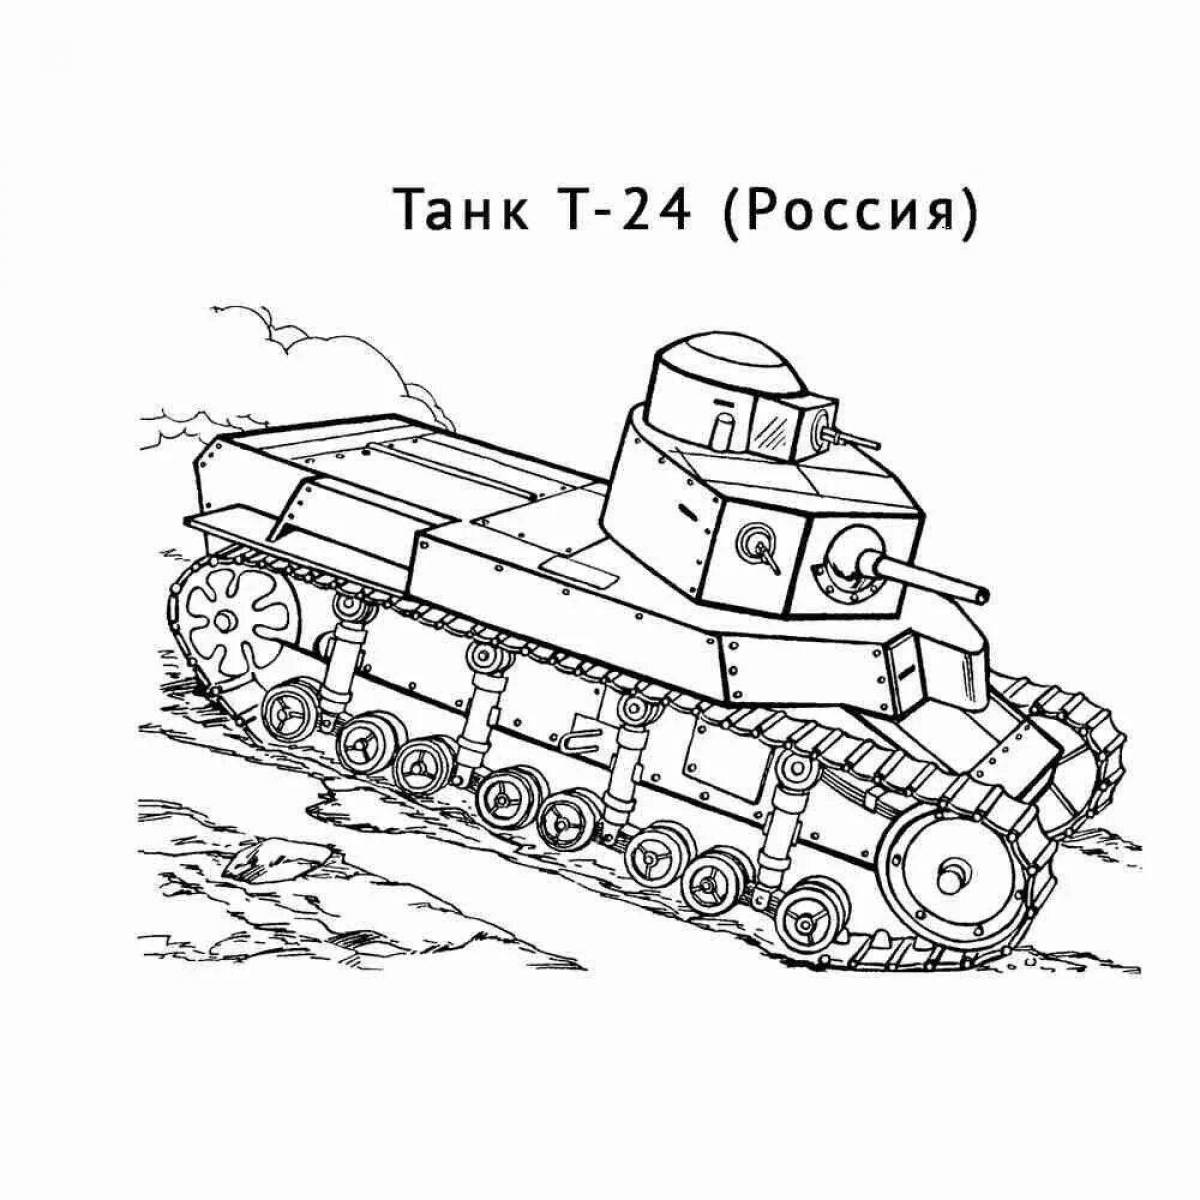 Playful k44 tank coloring page